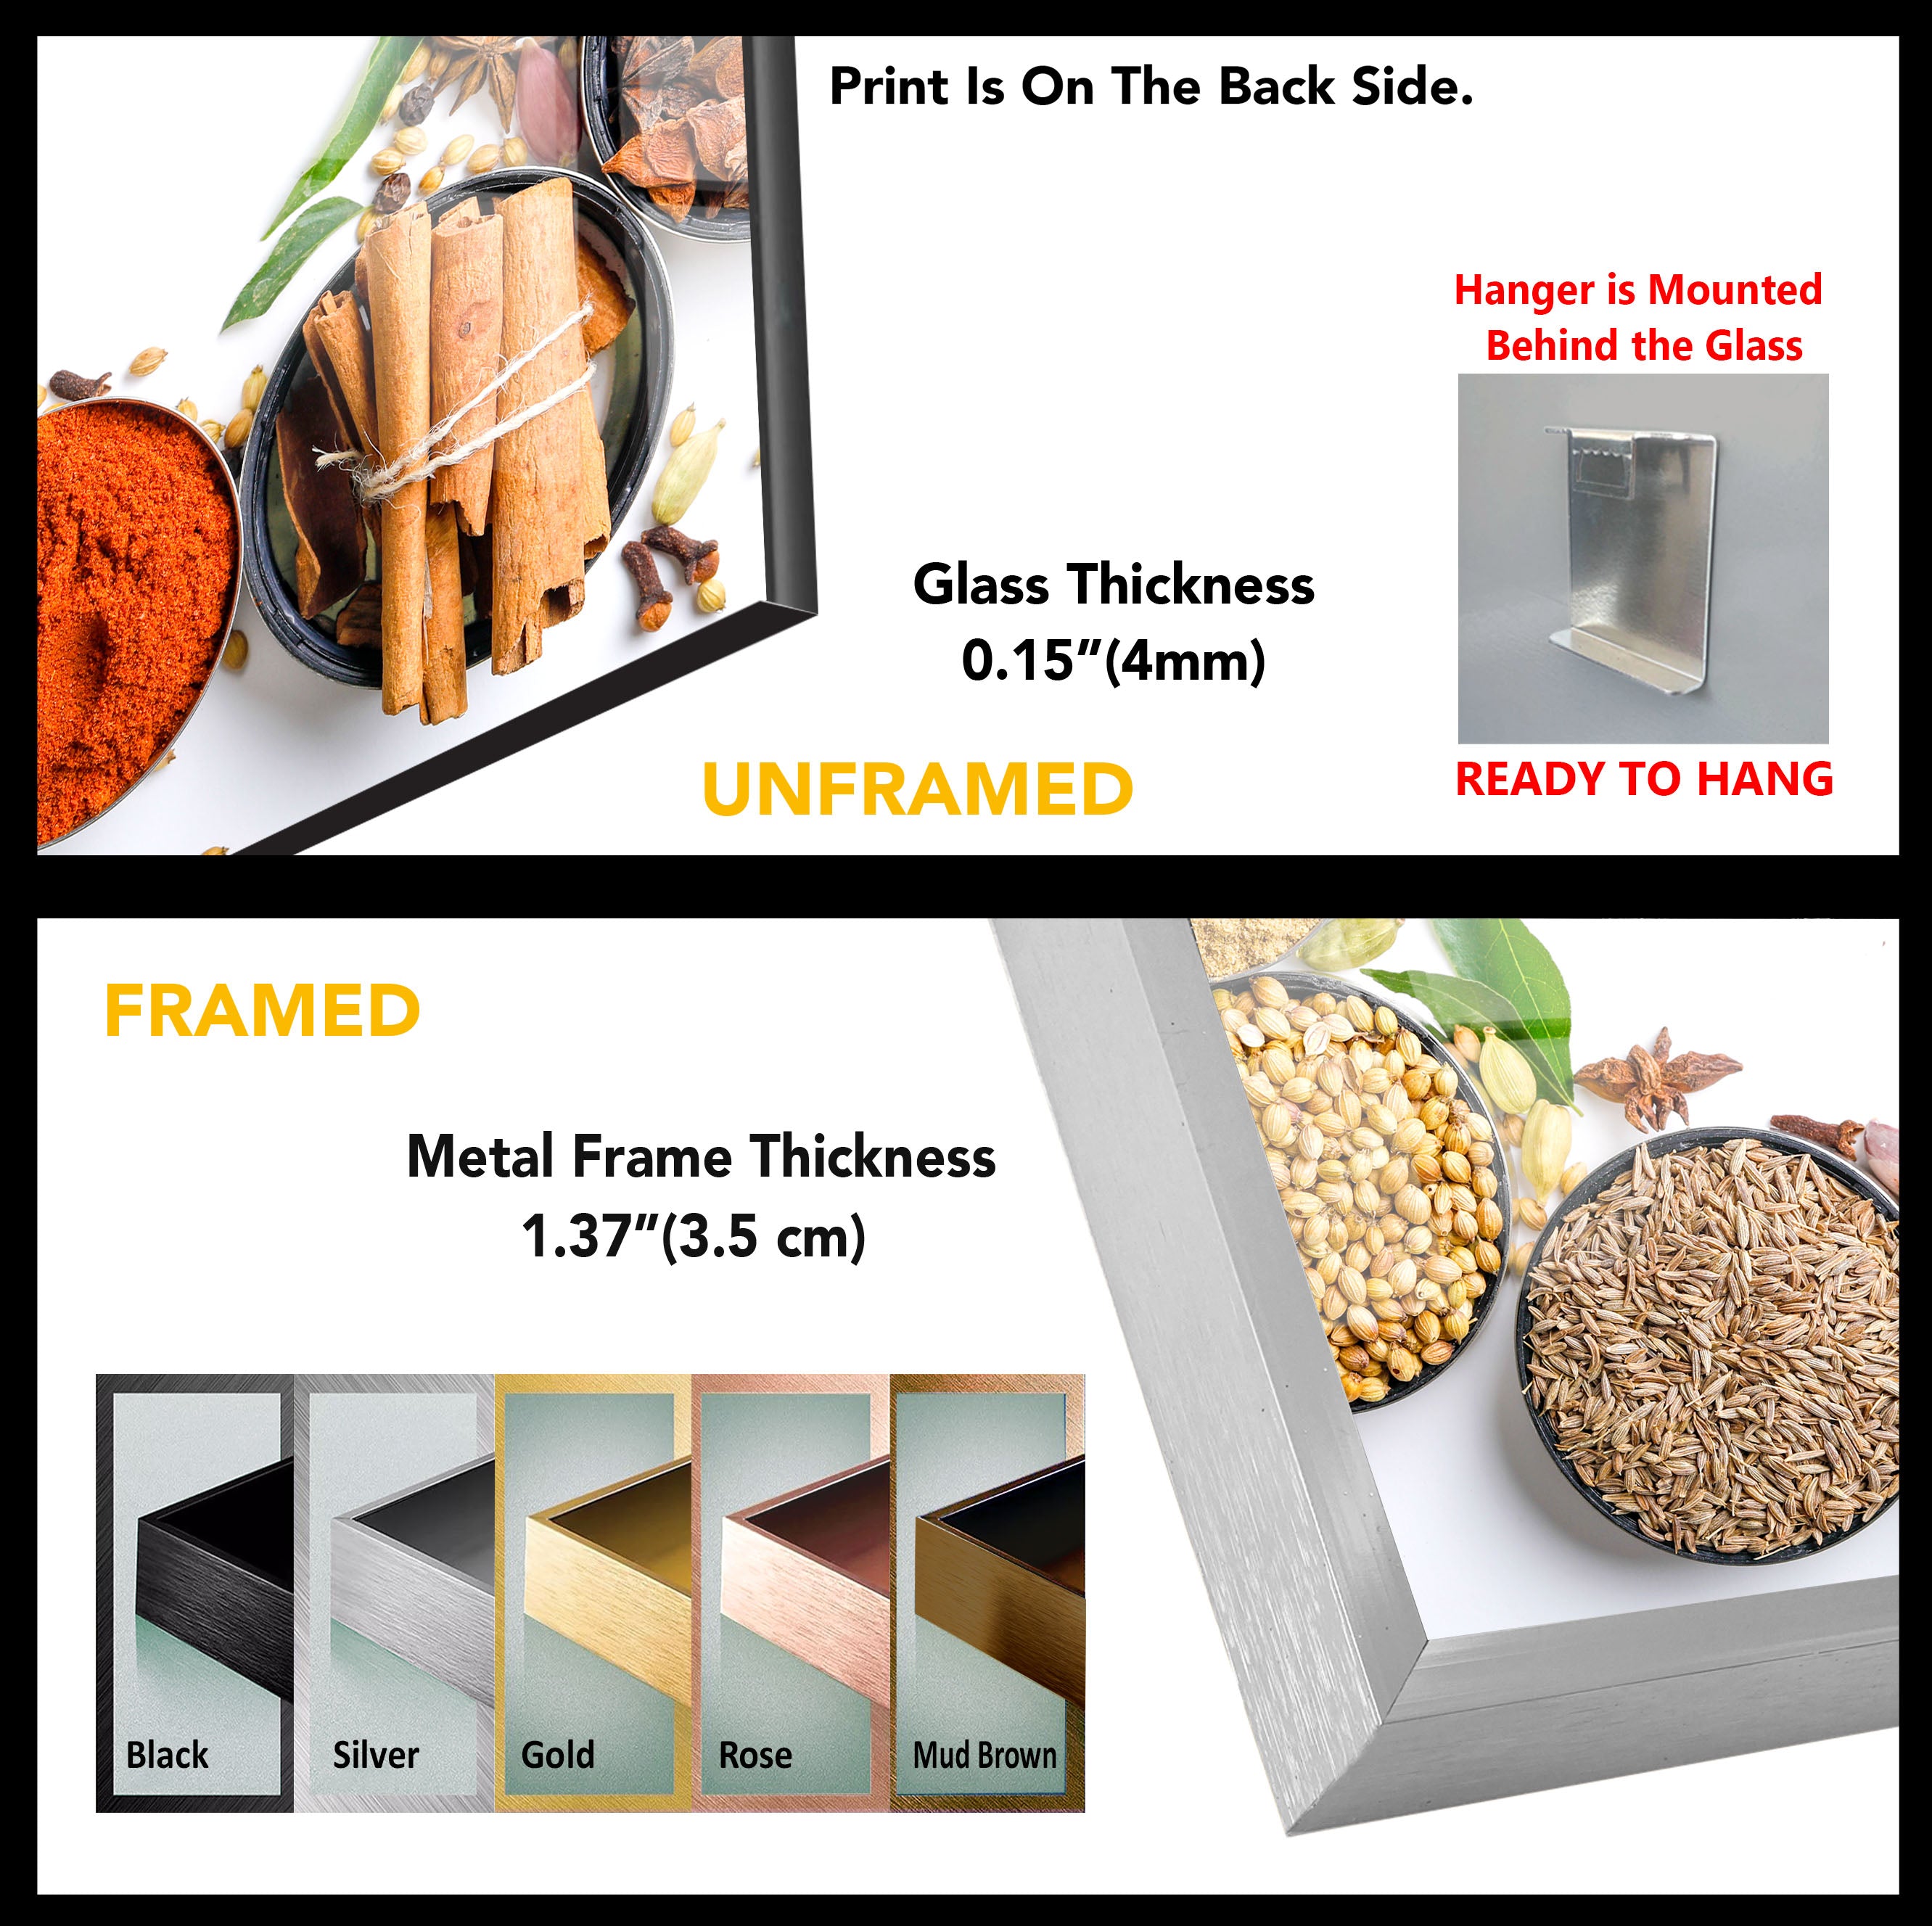 Kitchen Spices Tempered Glass Wall Art